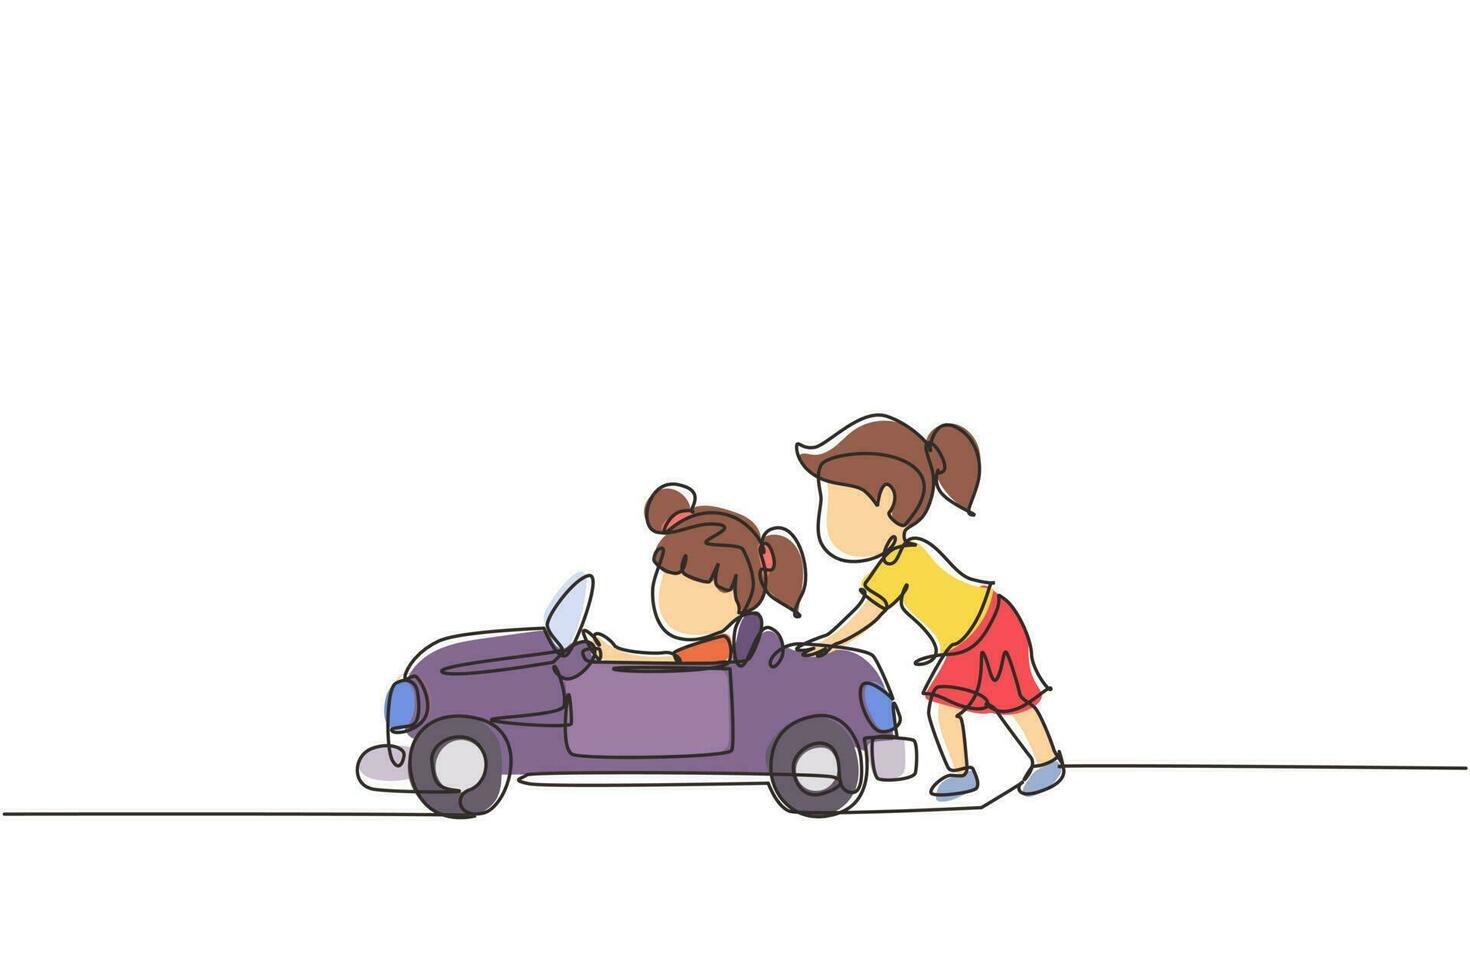 Single continuous line drawing a girl is pushing her friend's car in the road. Kids play with big toy car together. Sibling having fun with at backyard. Dynamic one line draw graphic design vector